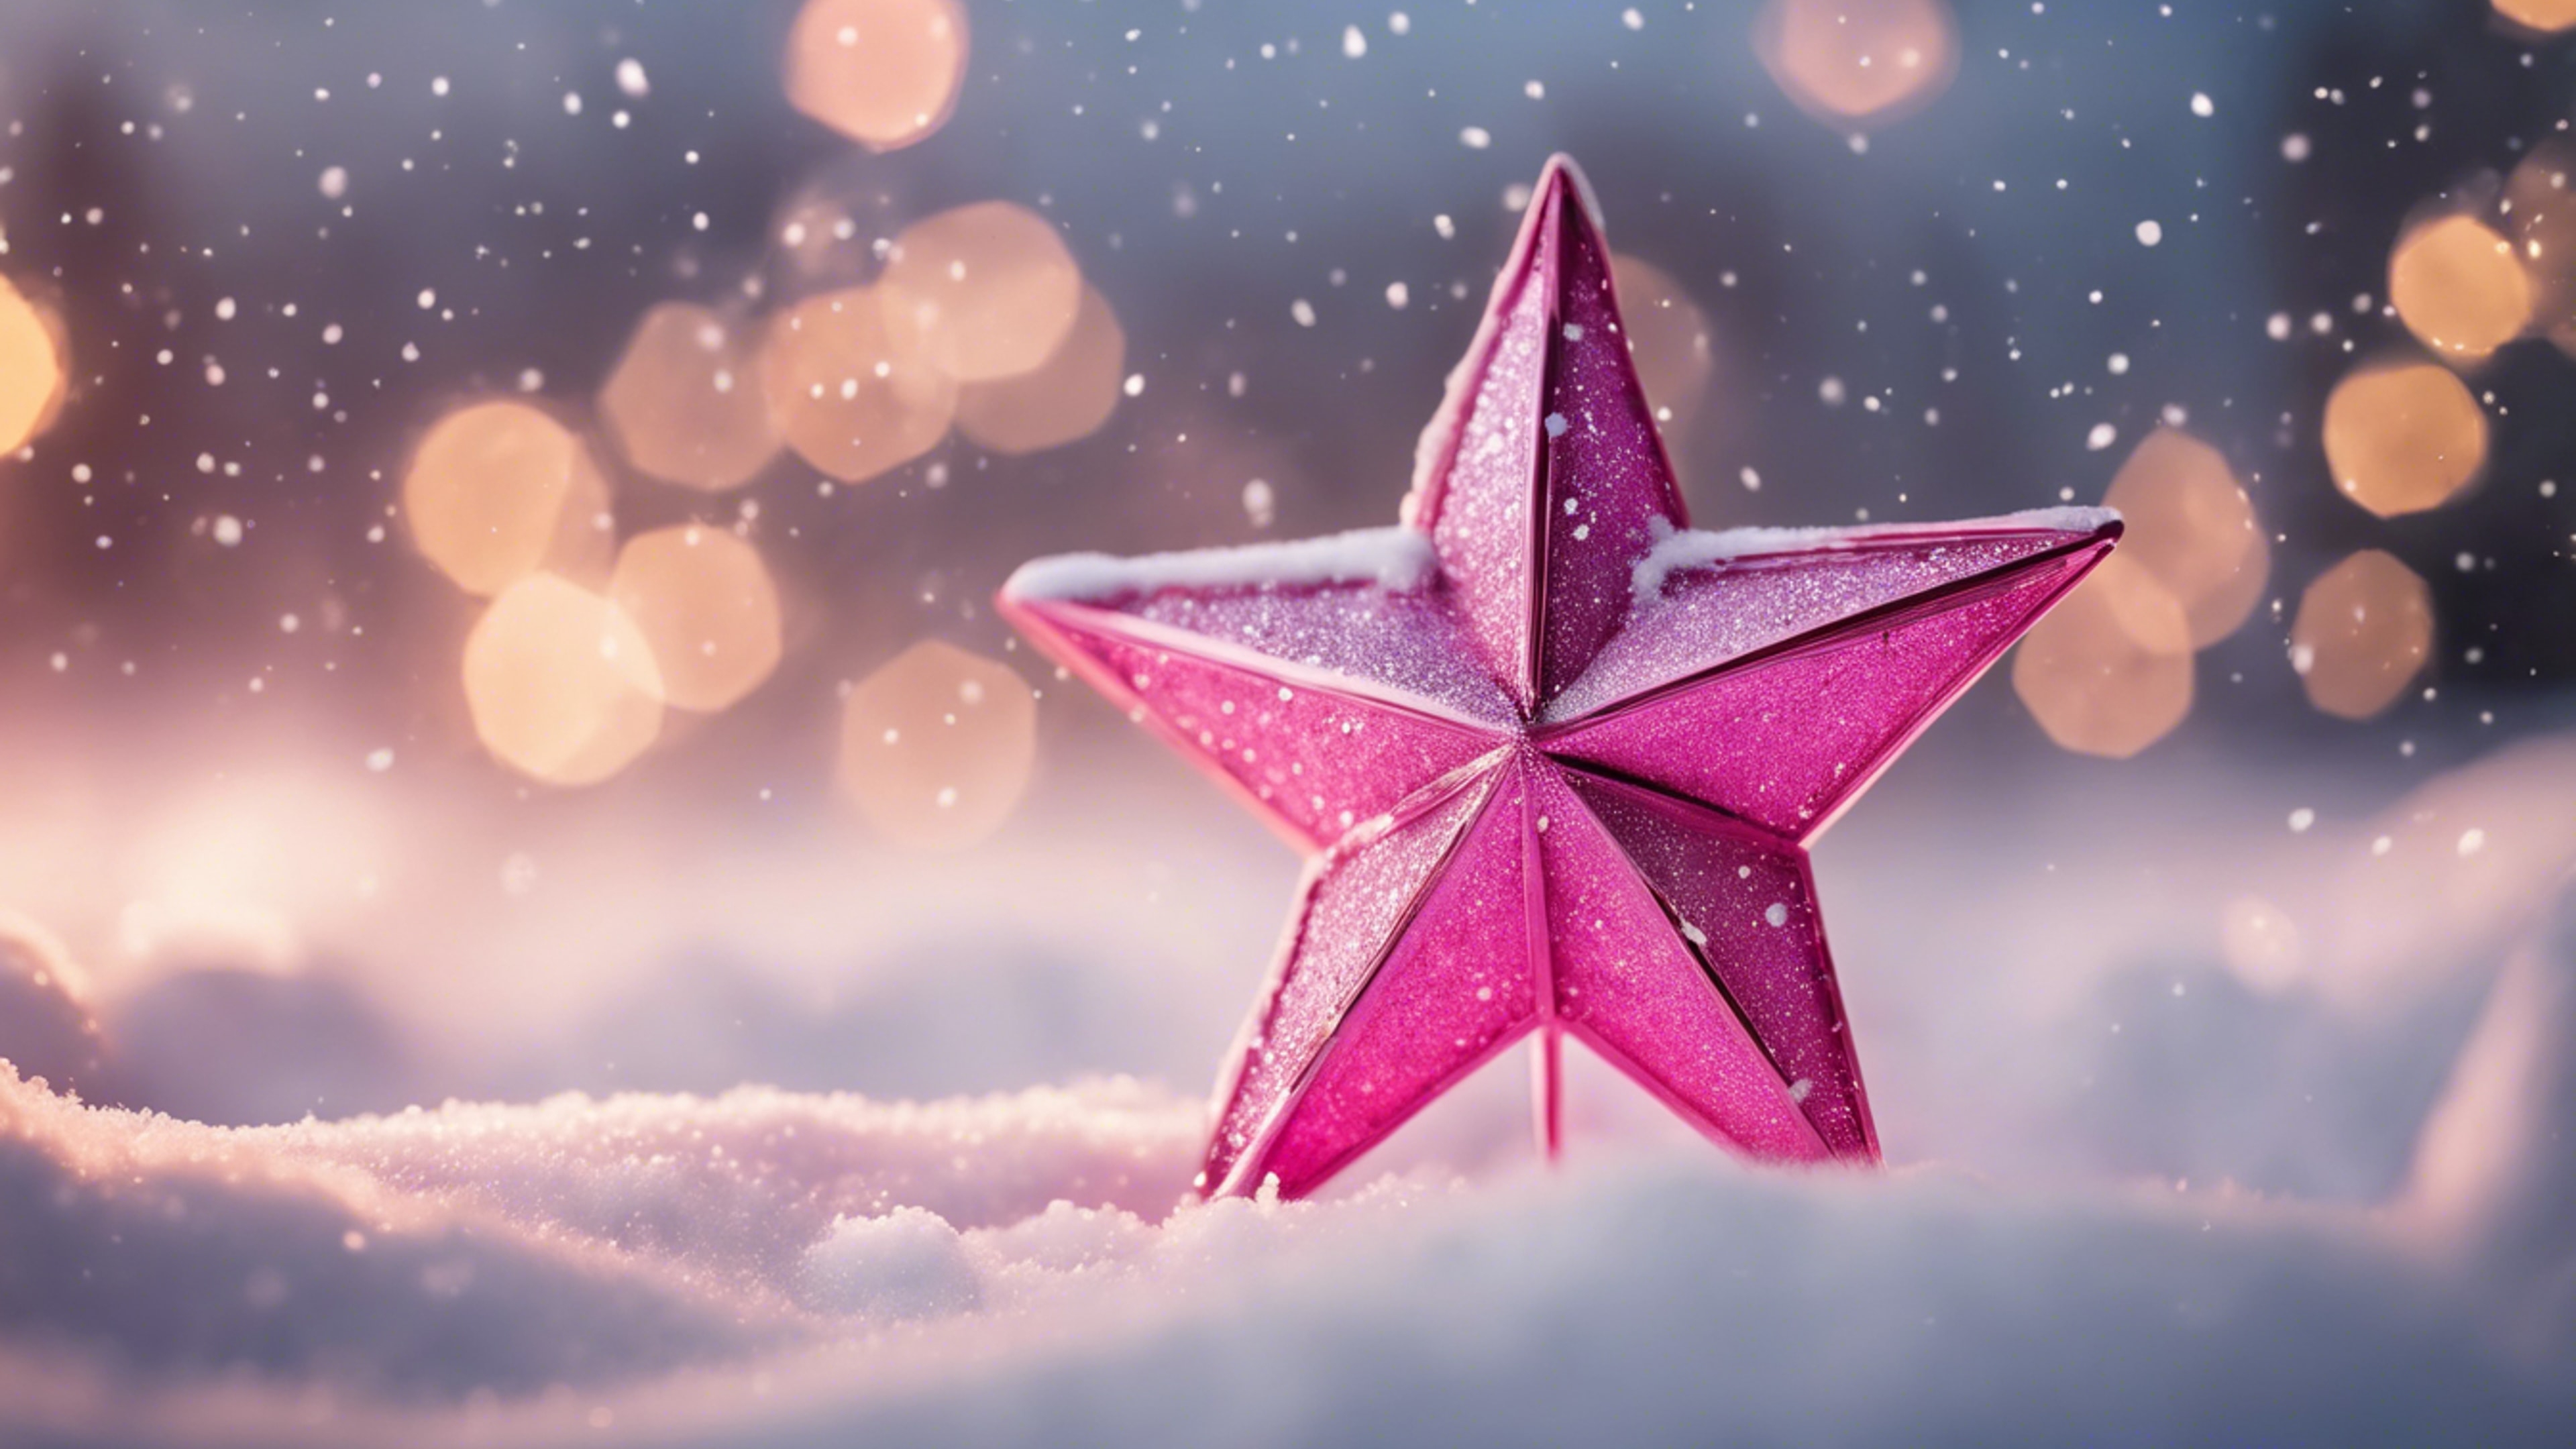 A brightly lit pink Christmas star against the backdrop of a snow-filled sky. Kertas dinding[528d0c7ac72f41809e7e]